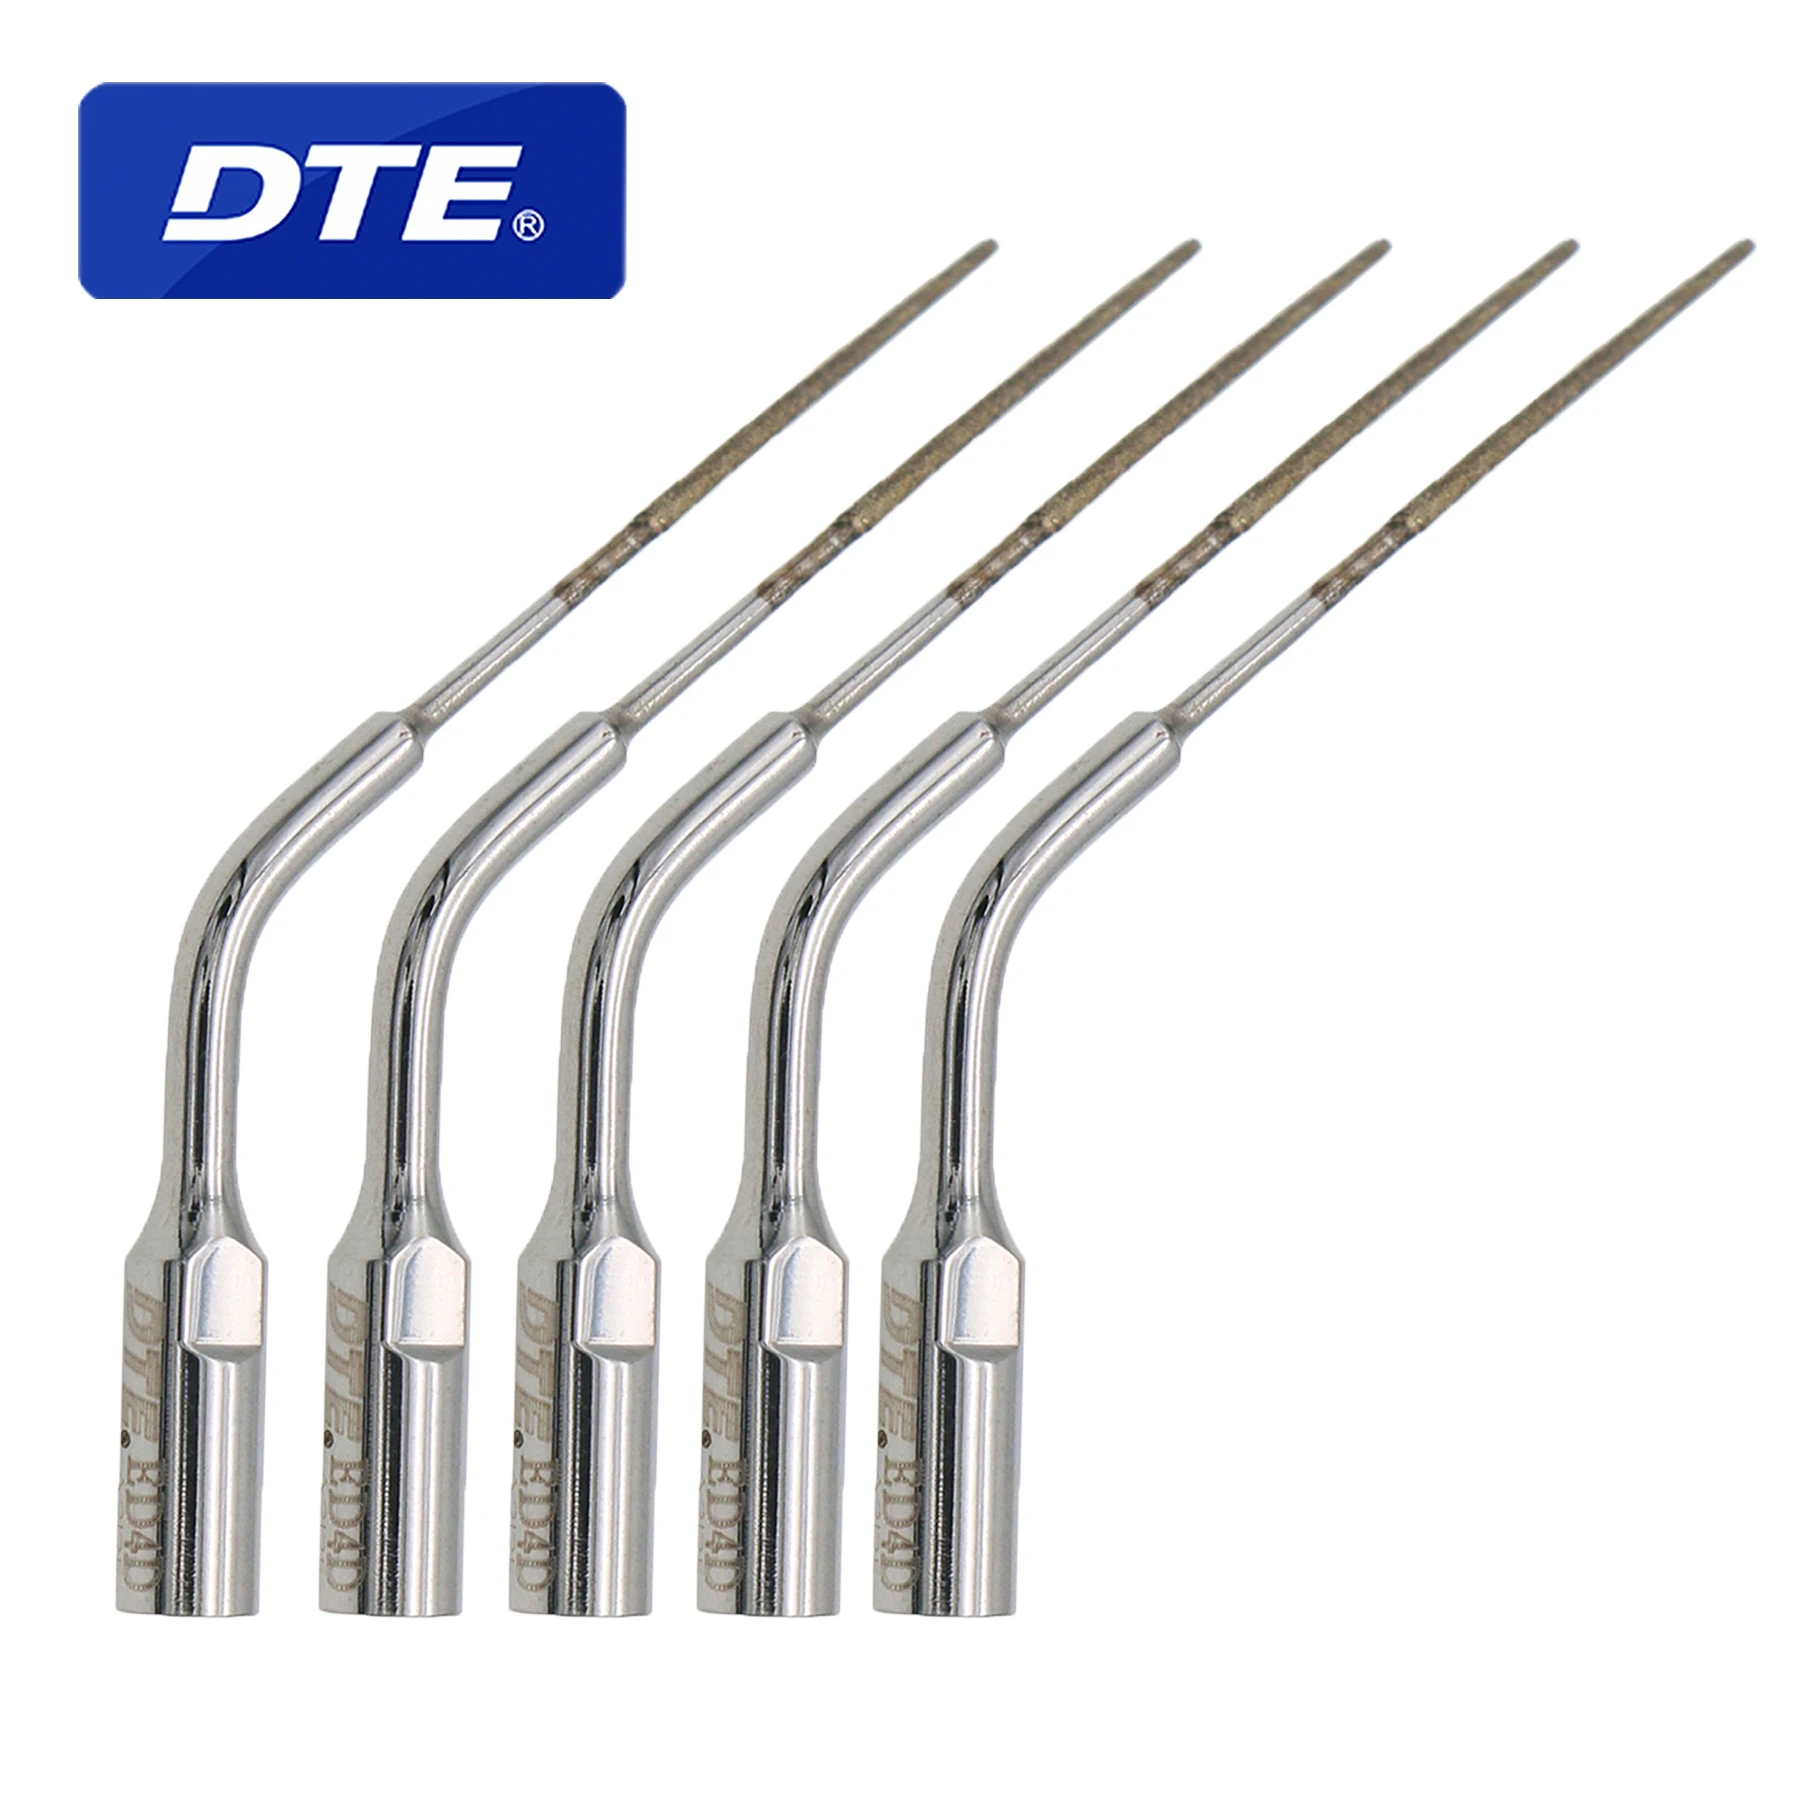 DTE Dental Ultrasonic Scaler Tip ED4D With Diamond Coated Root Canal Periodontics Endodontics Tools Compatible With NSK SATELEC